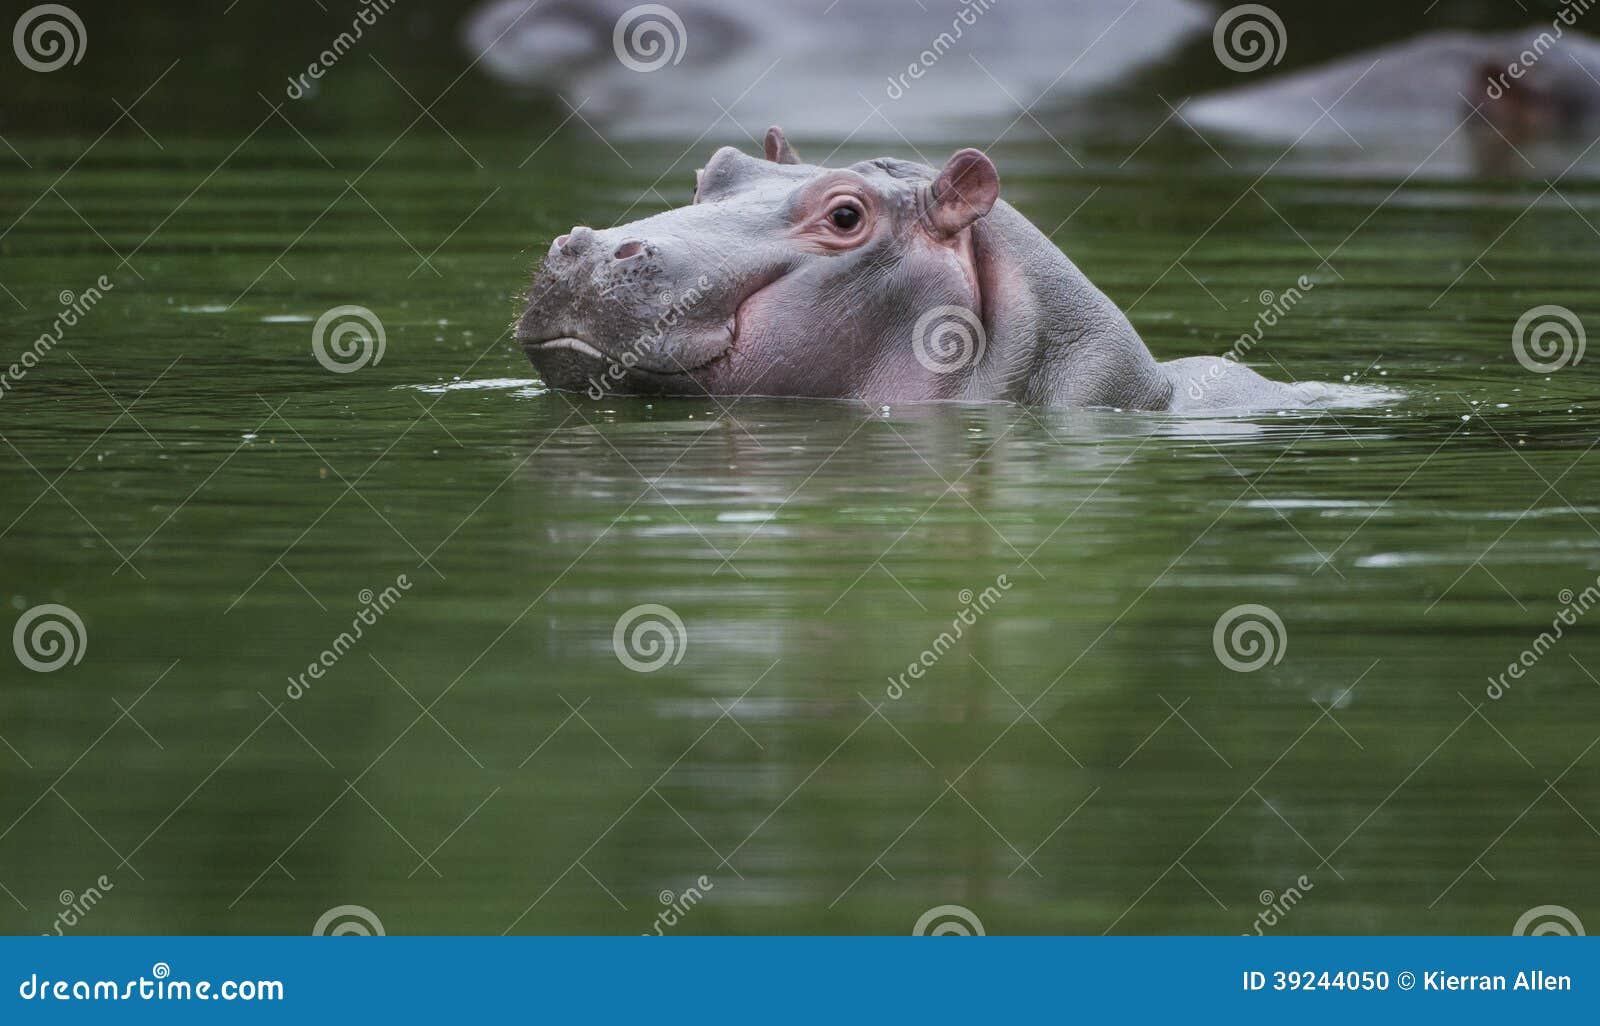 baby hippo in water